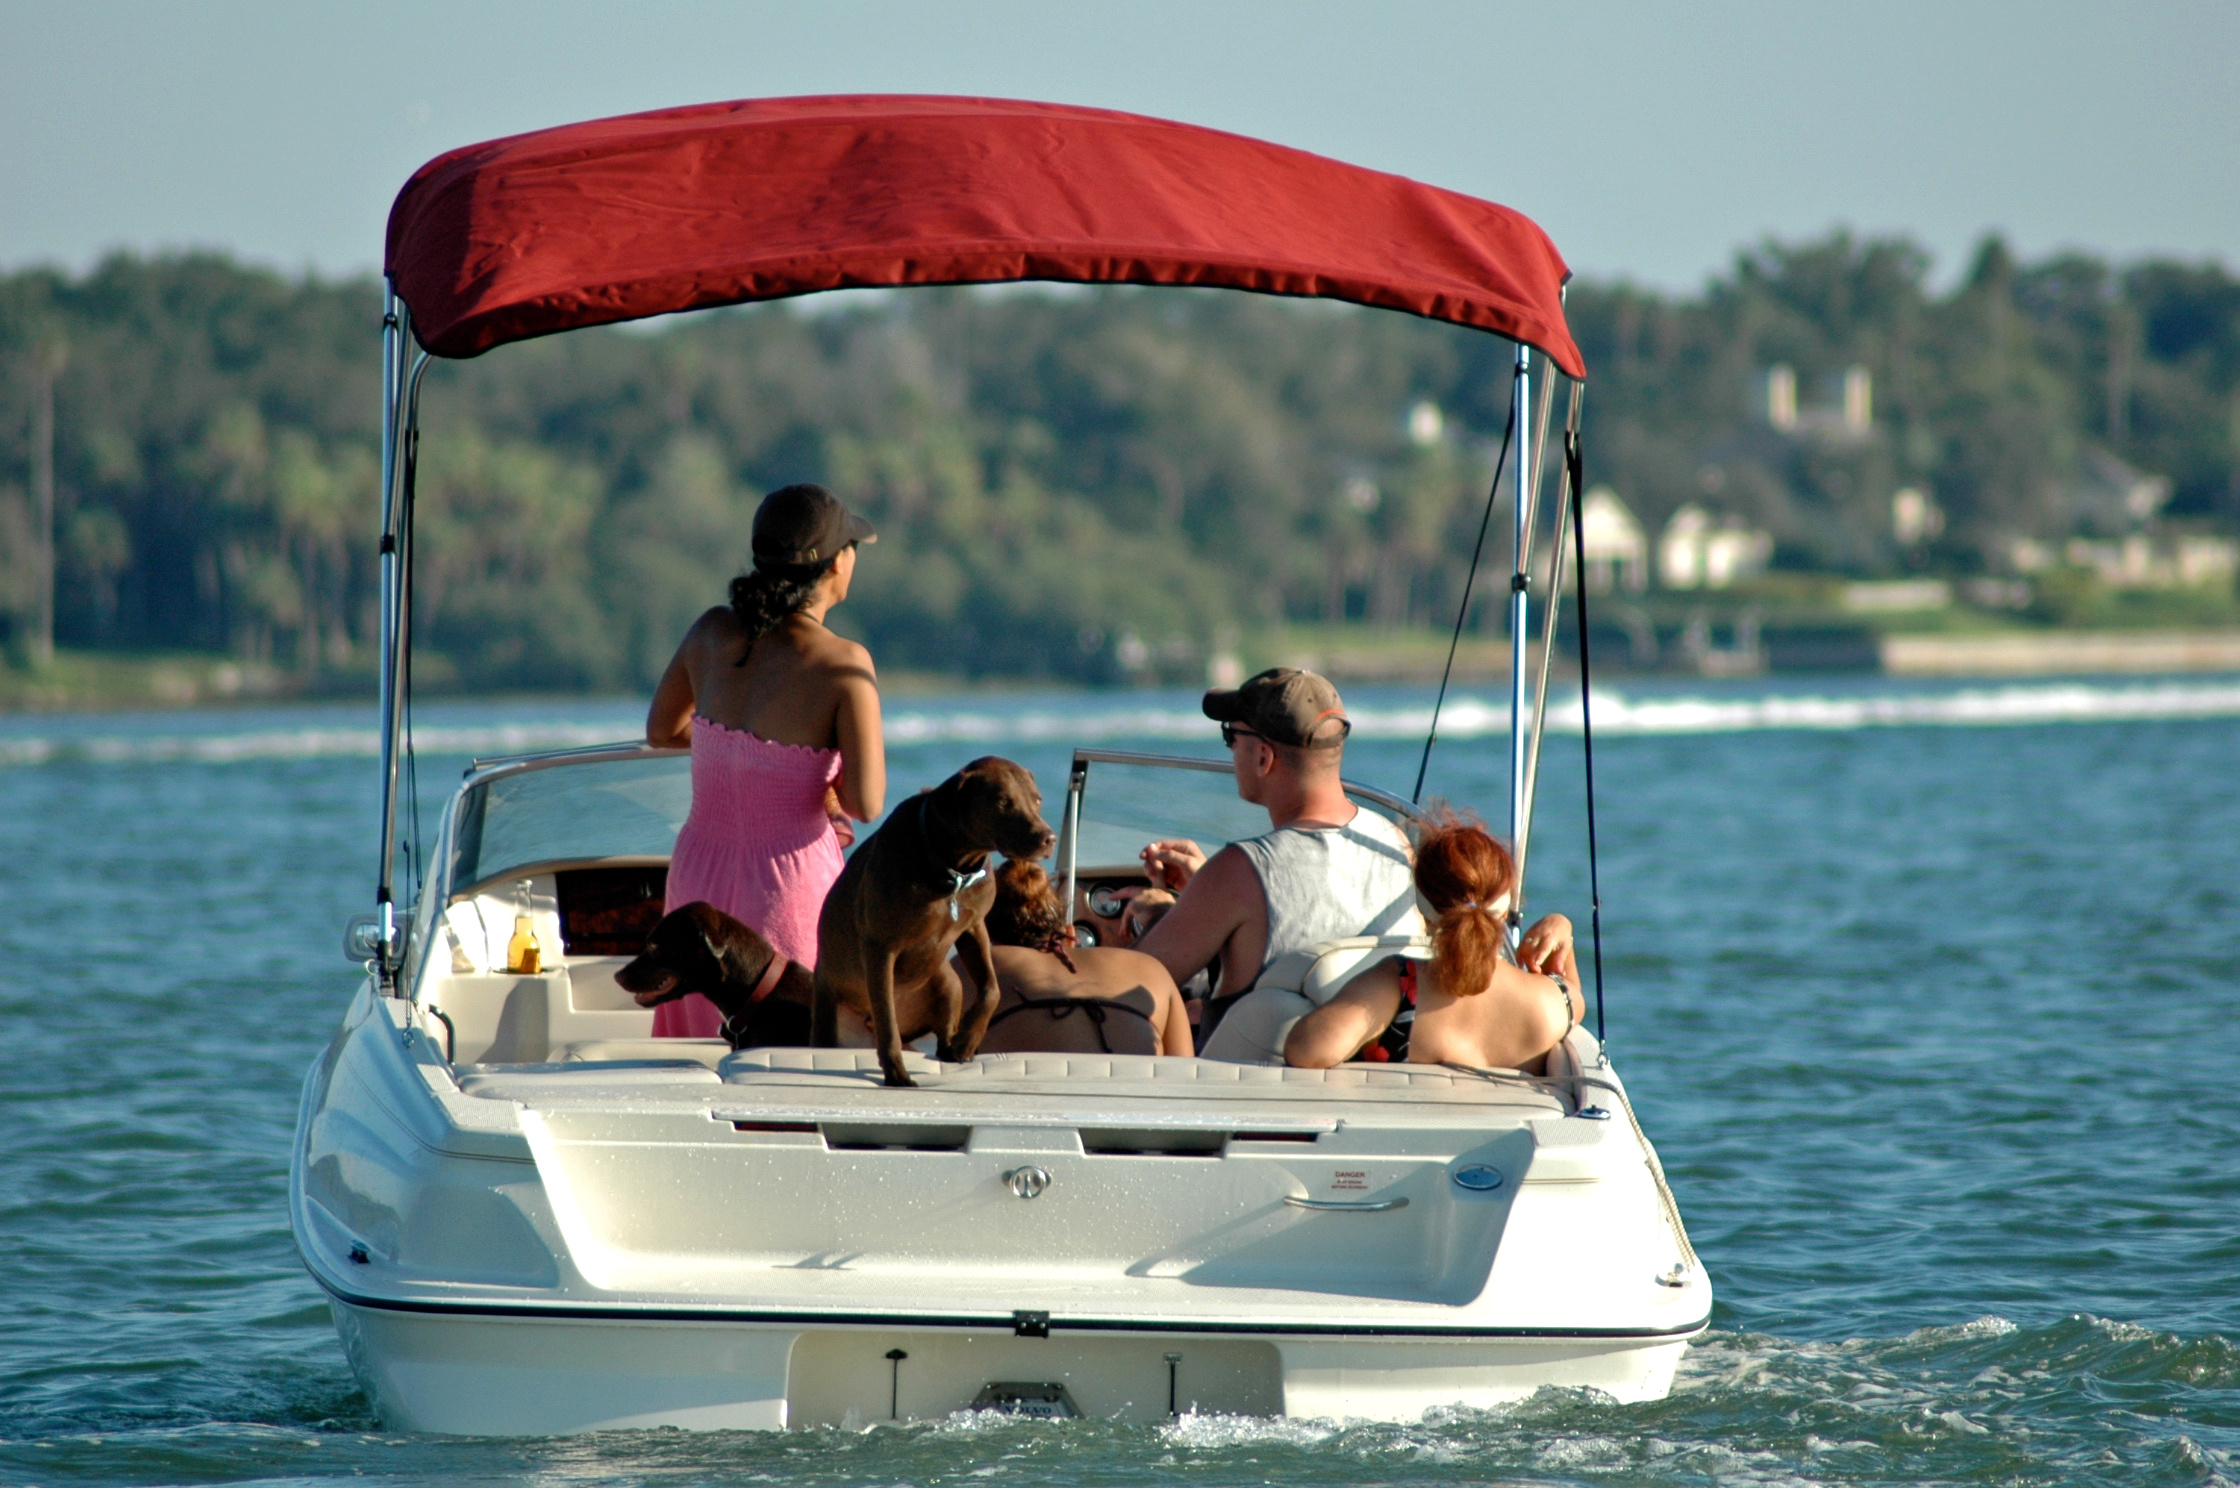 Why we love boating on the Chesapeake Bay in September